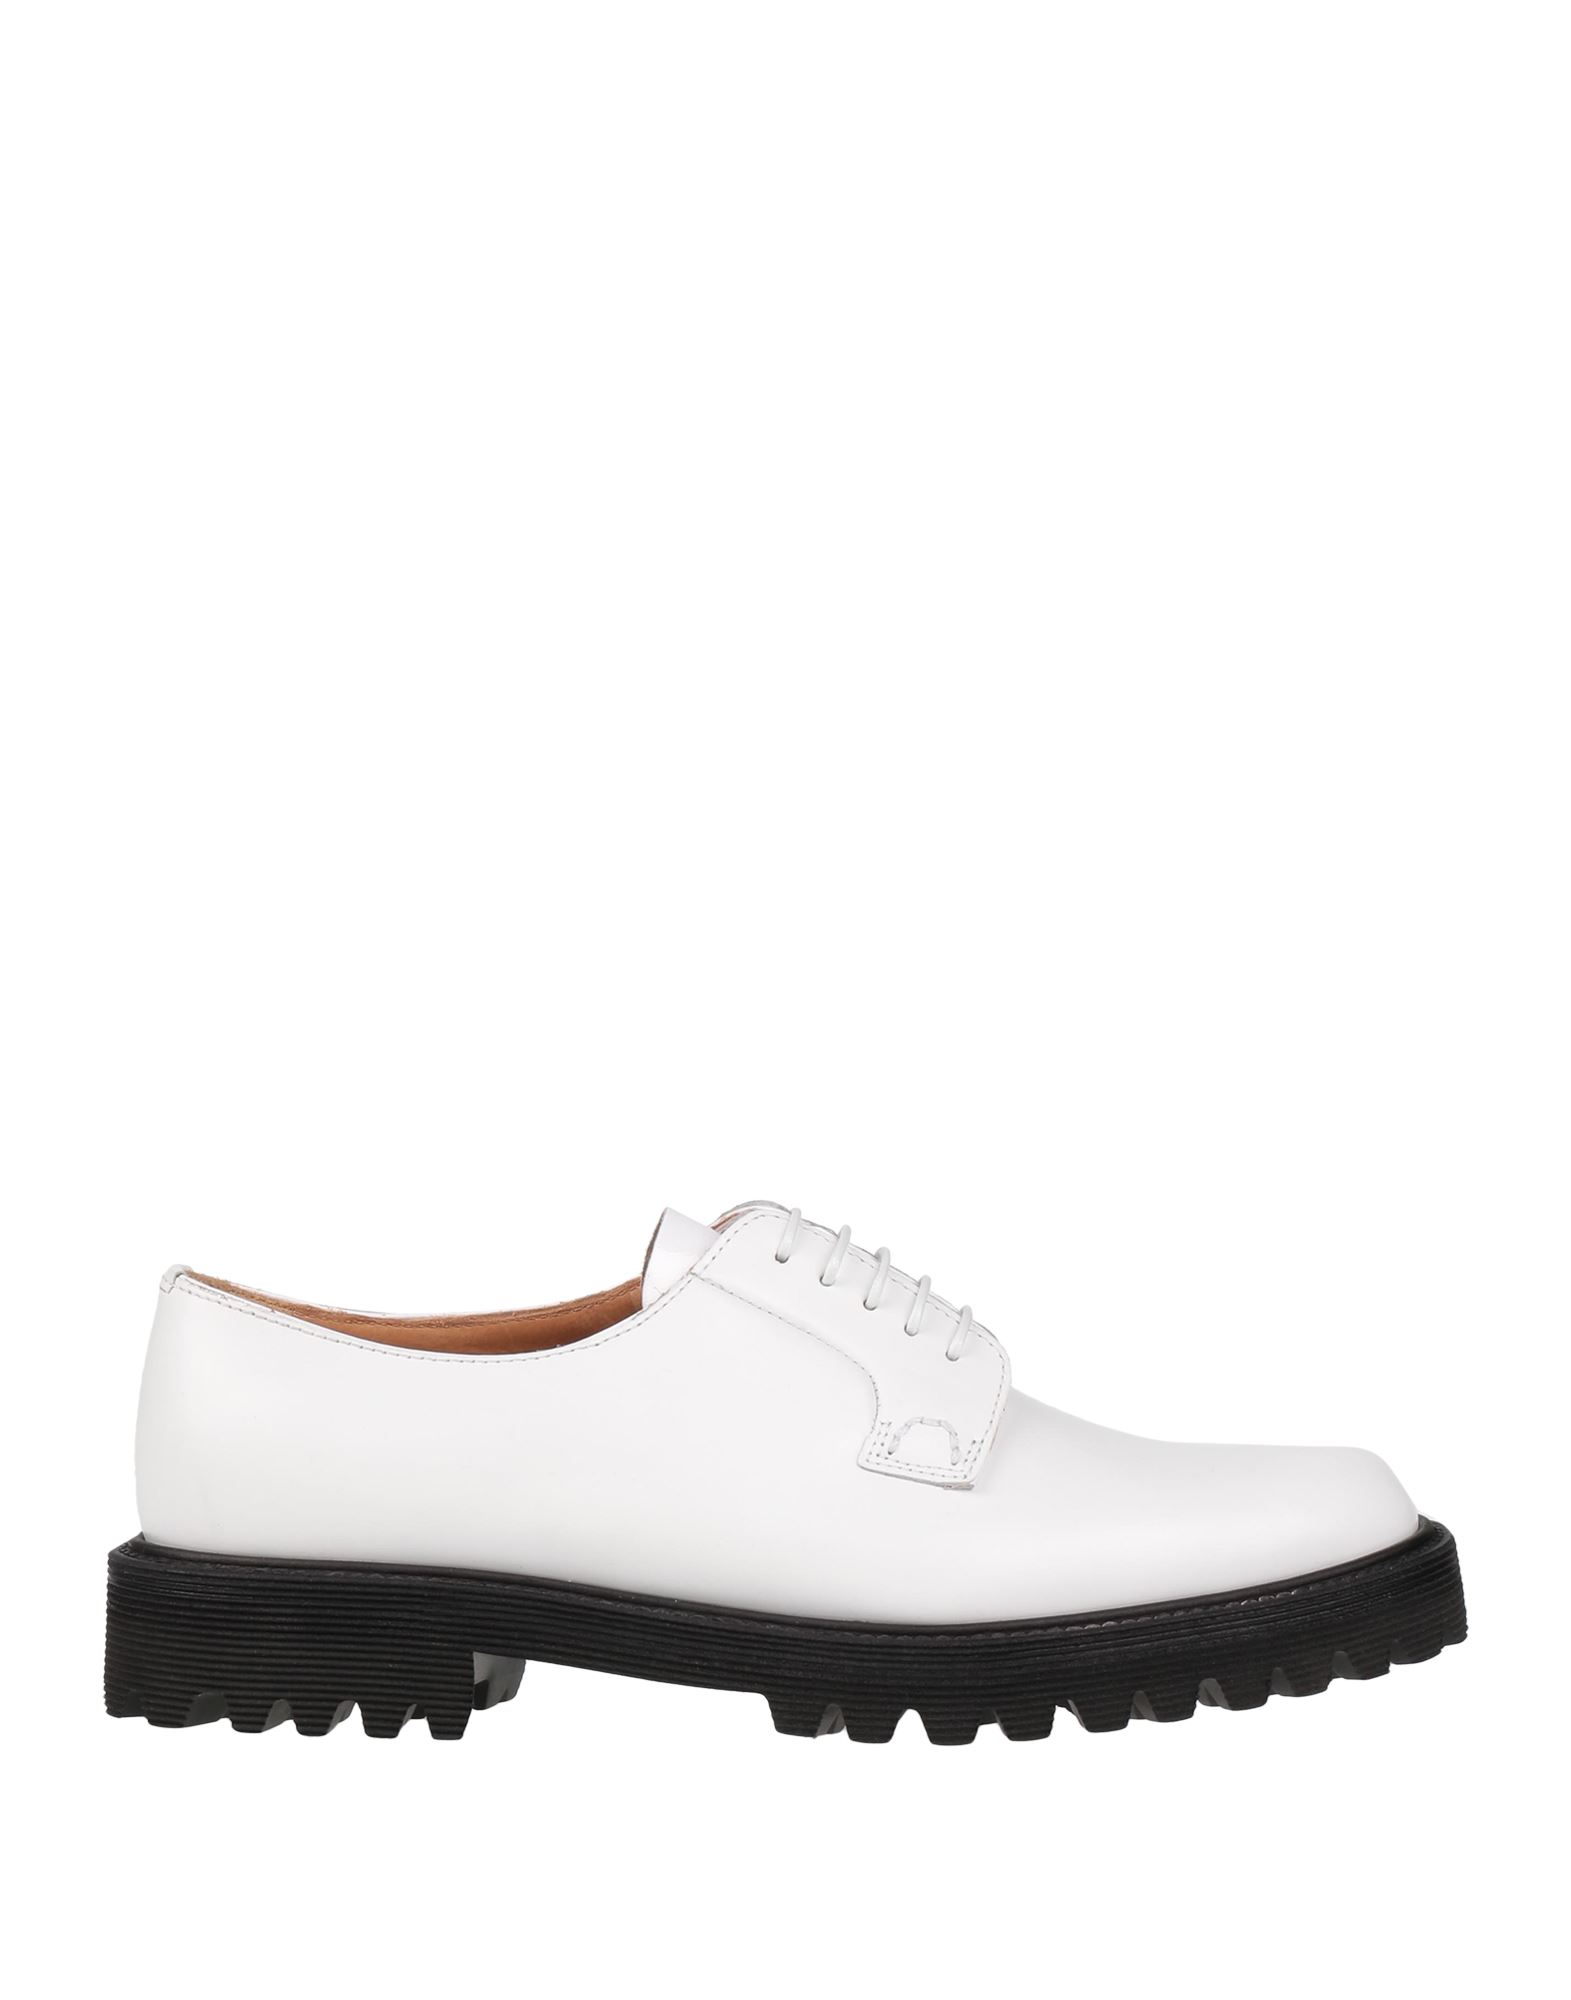 Church's Woman Lace-up Shoes White Size 7 Calfskin